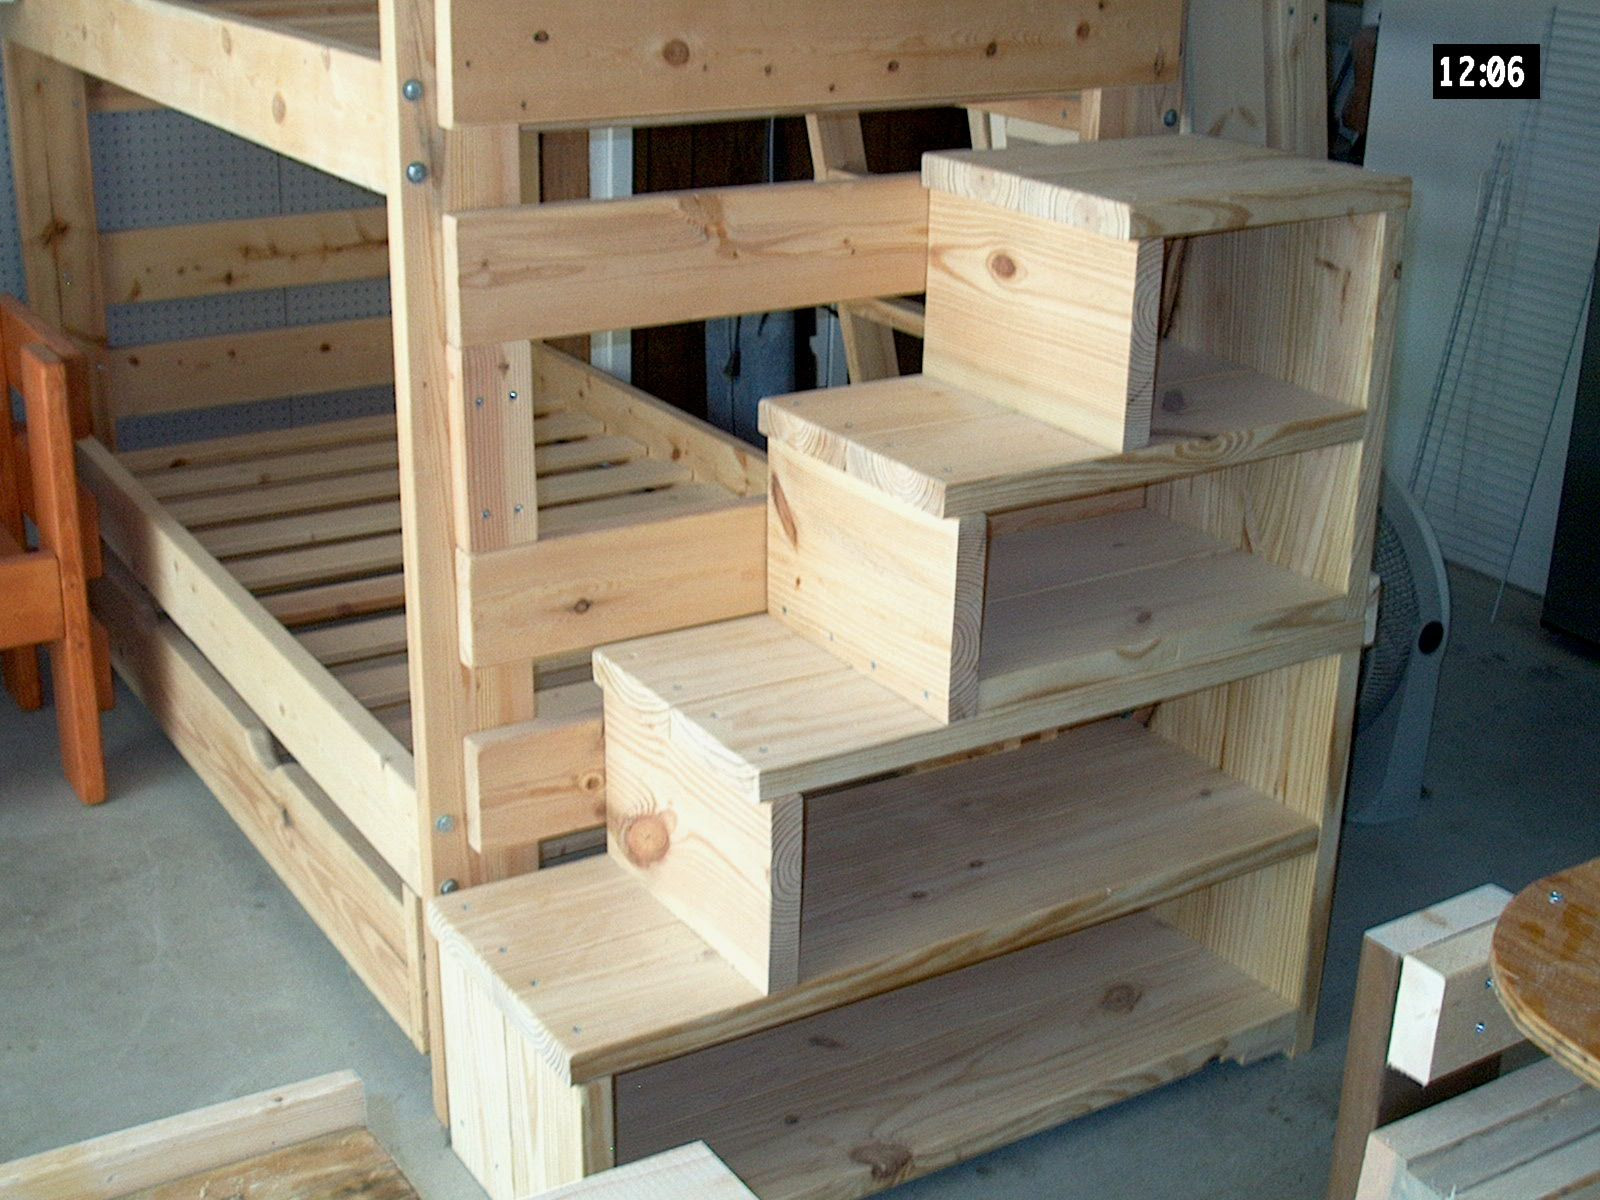 DIY Kids Bed With Storage
 Sturdy stair and storage link is worthless but pic is